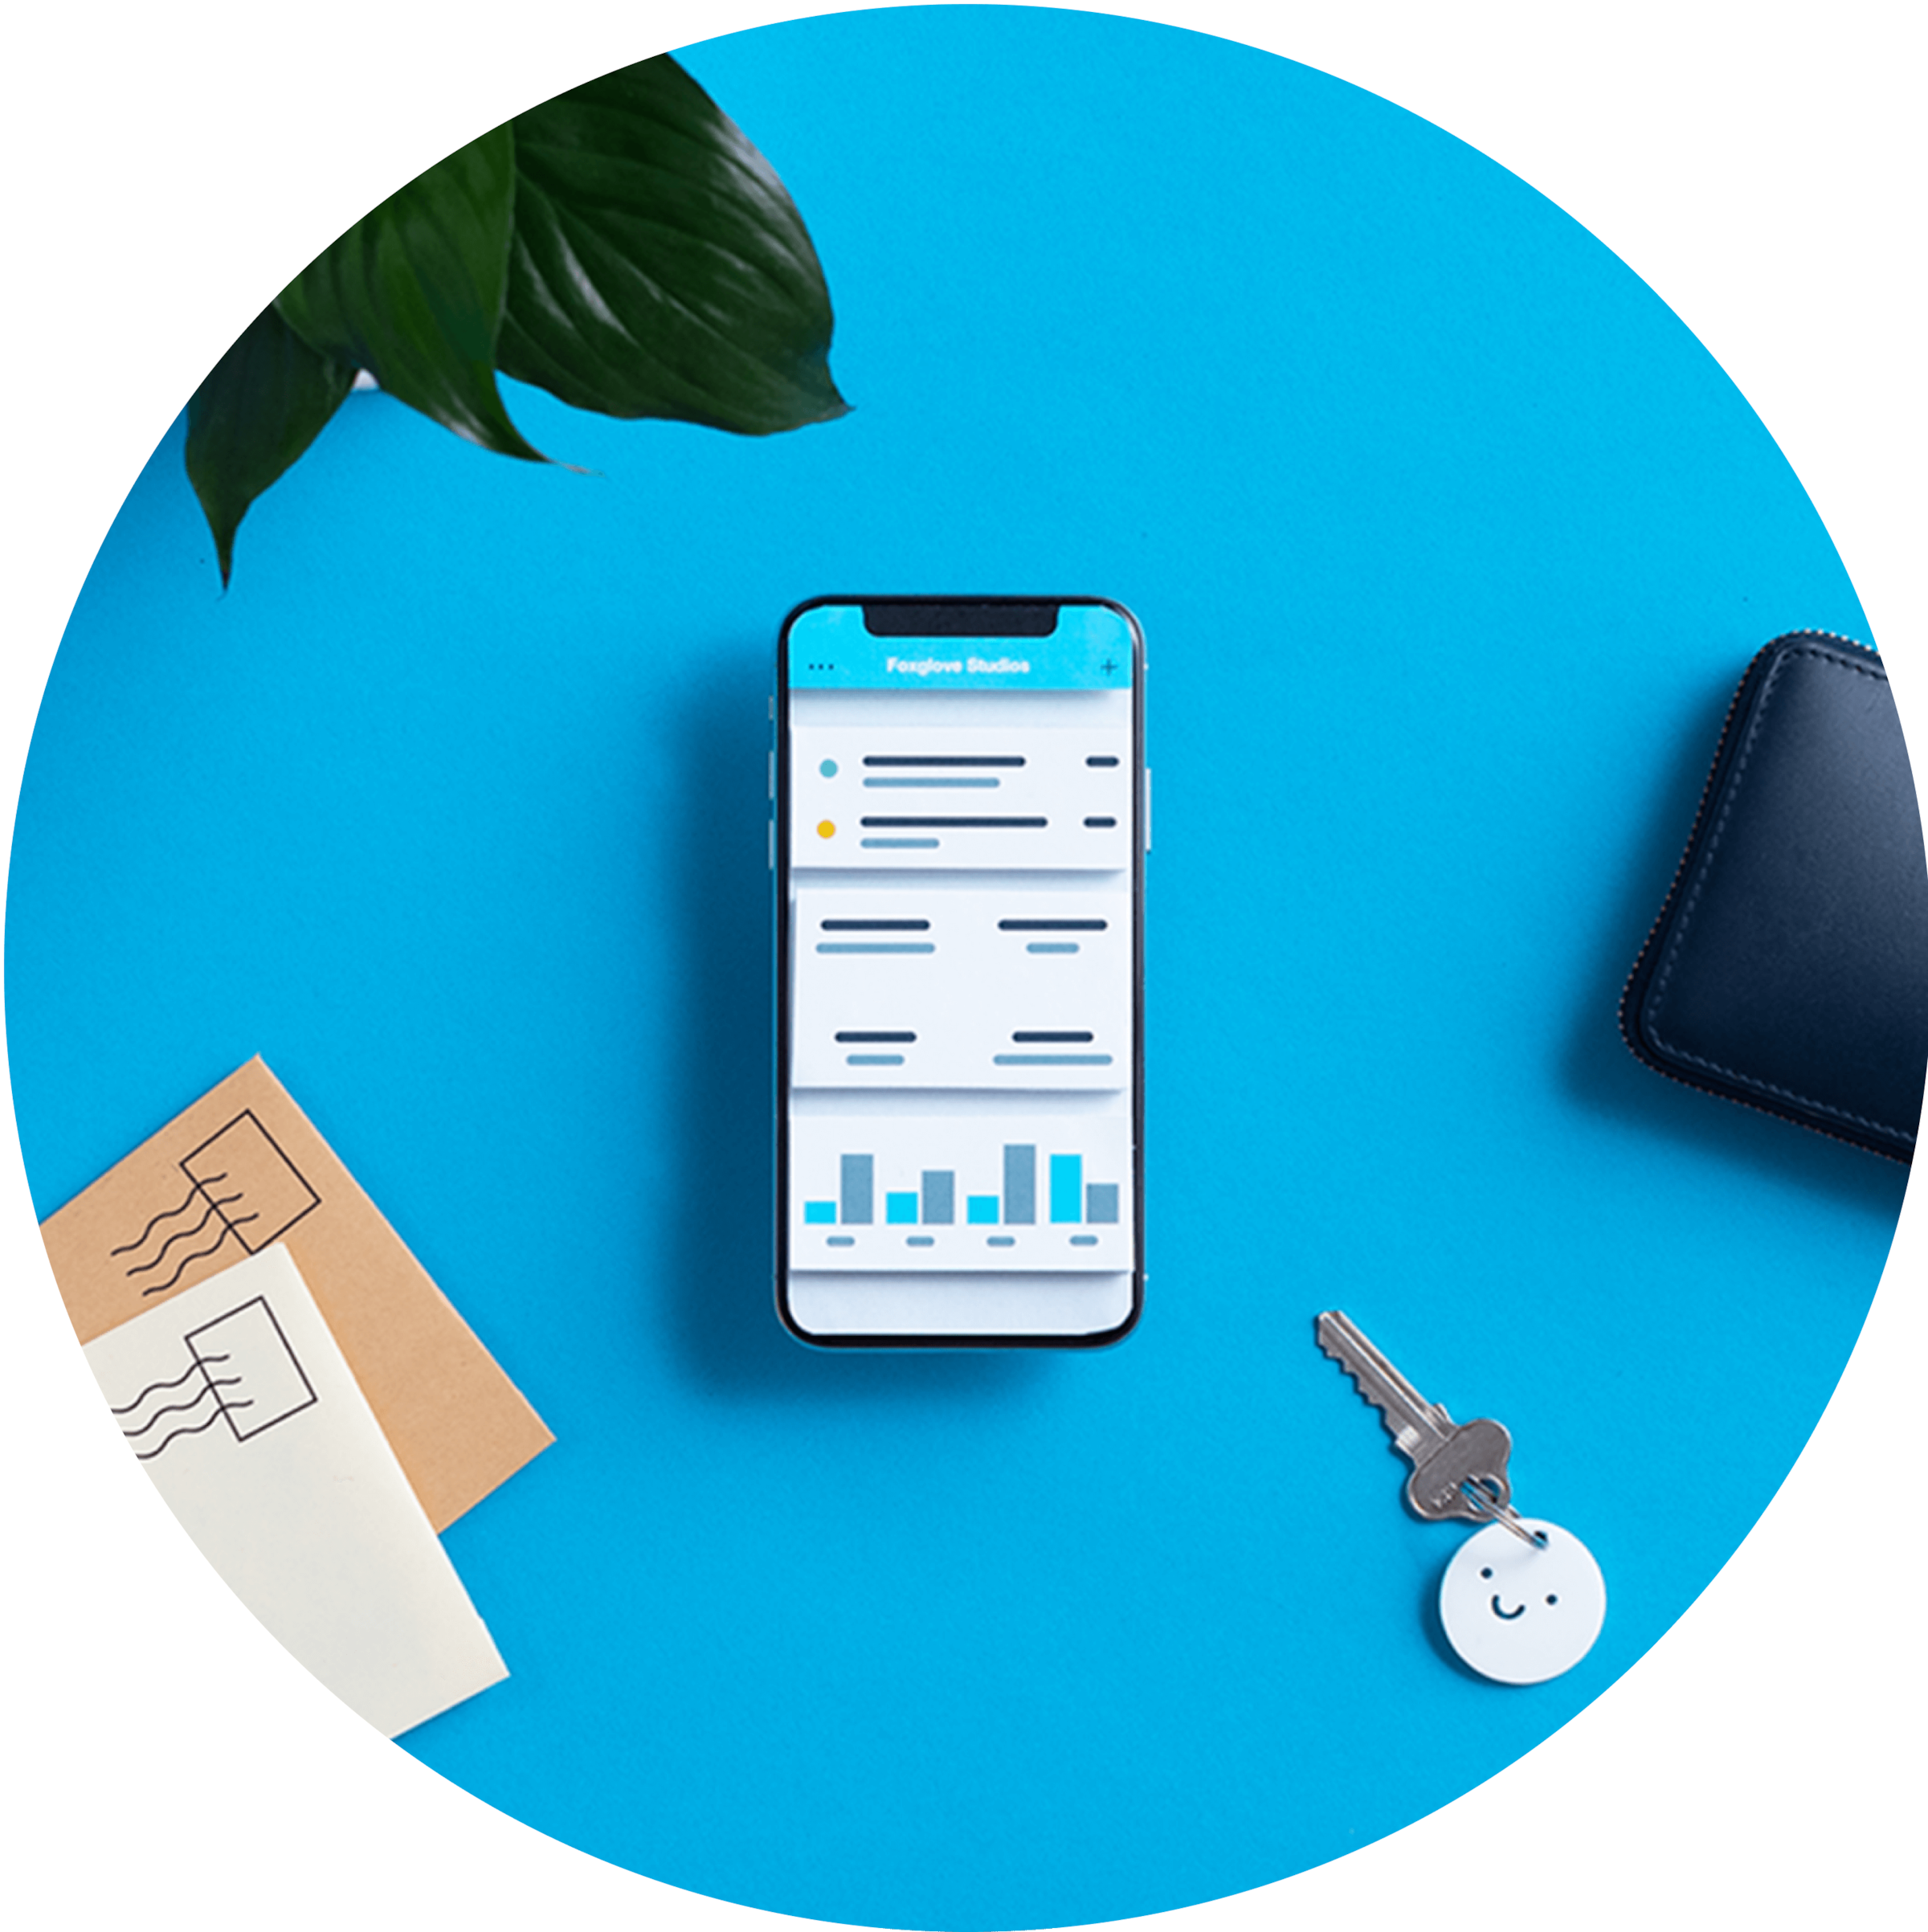 Xero’s free mobile app gives you access to many Xero tools and the freedom to do business anywhere.